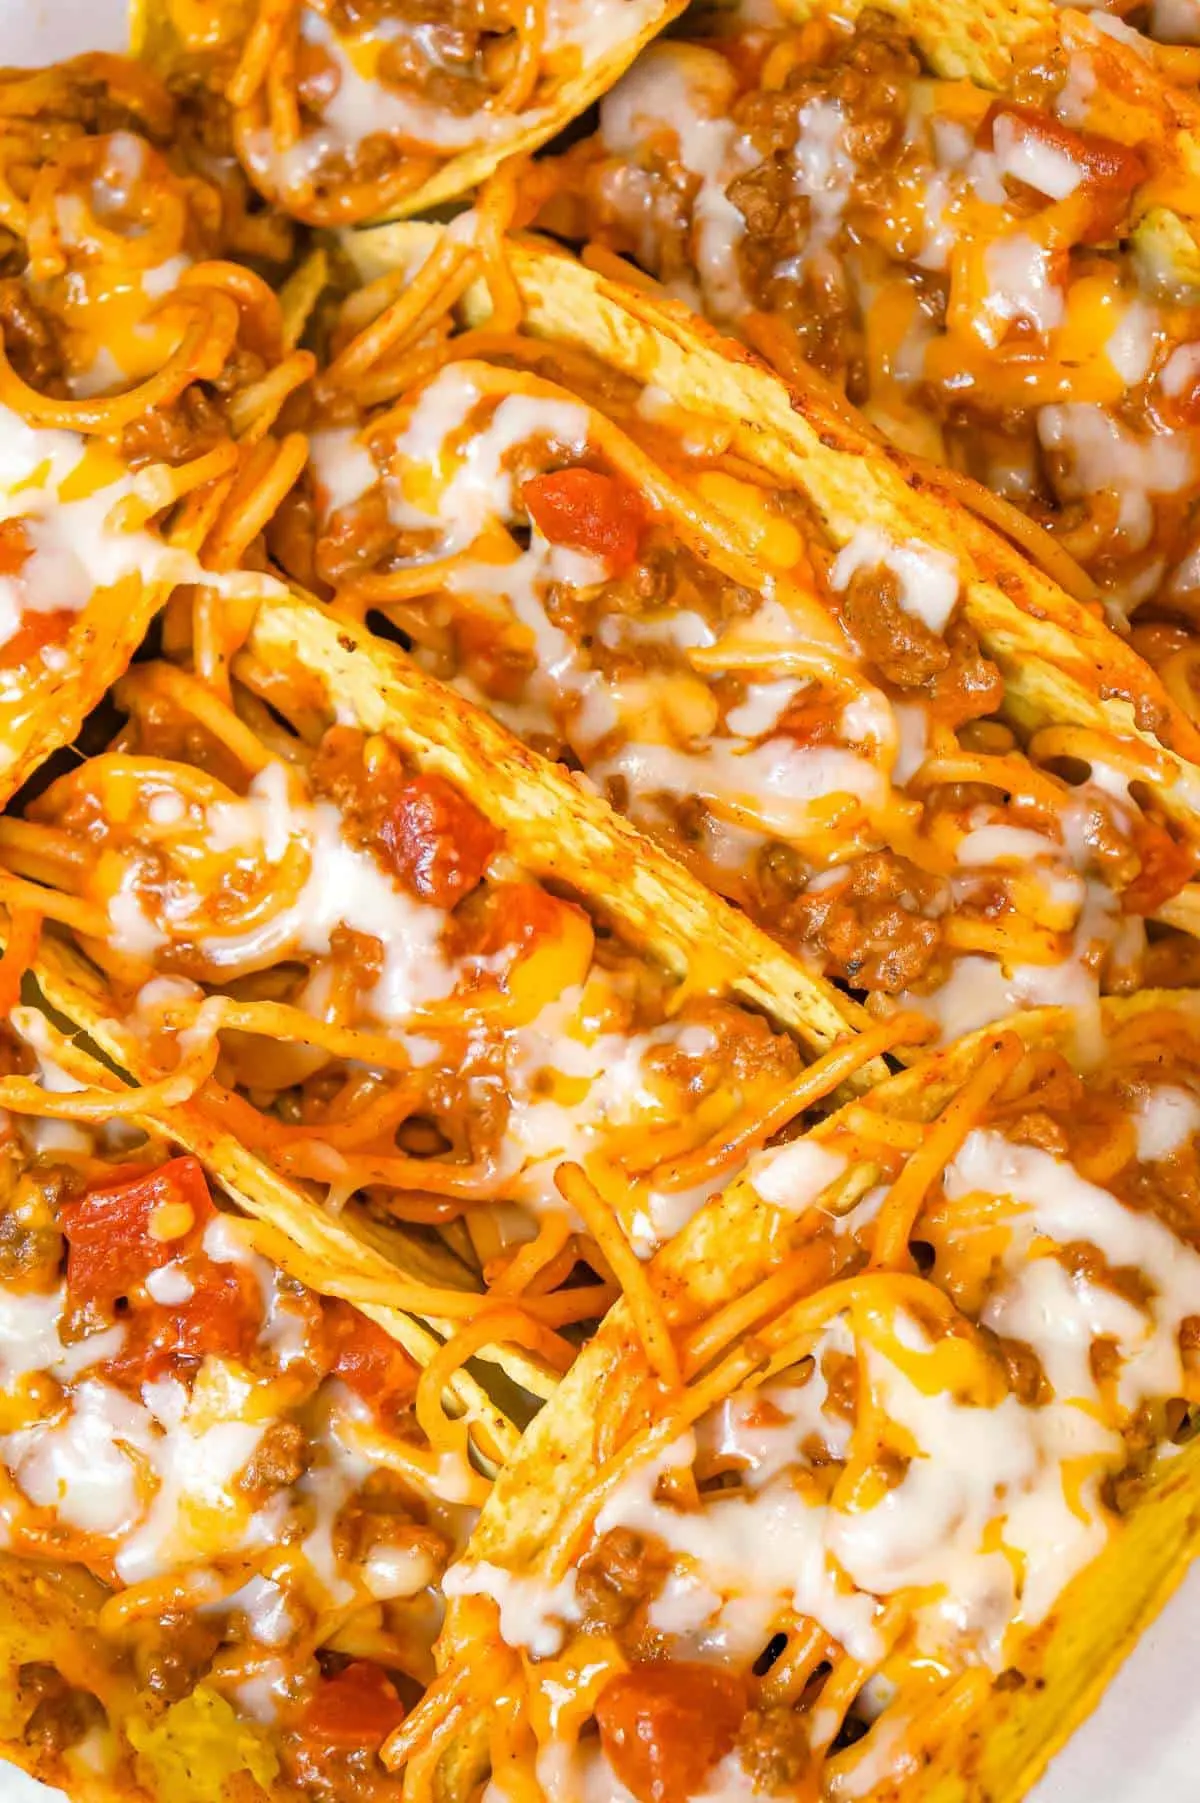 Spaghetti Tacos are an easy dinner recipe made with stand and stuff taco shells loaded with spaghetti and ground beef tossed in in tomato sauce with taco seasoning and baked with cheese.